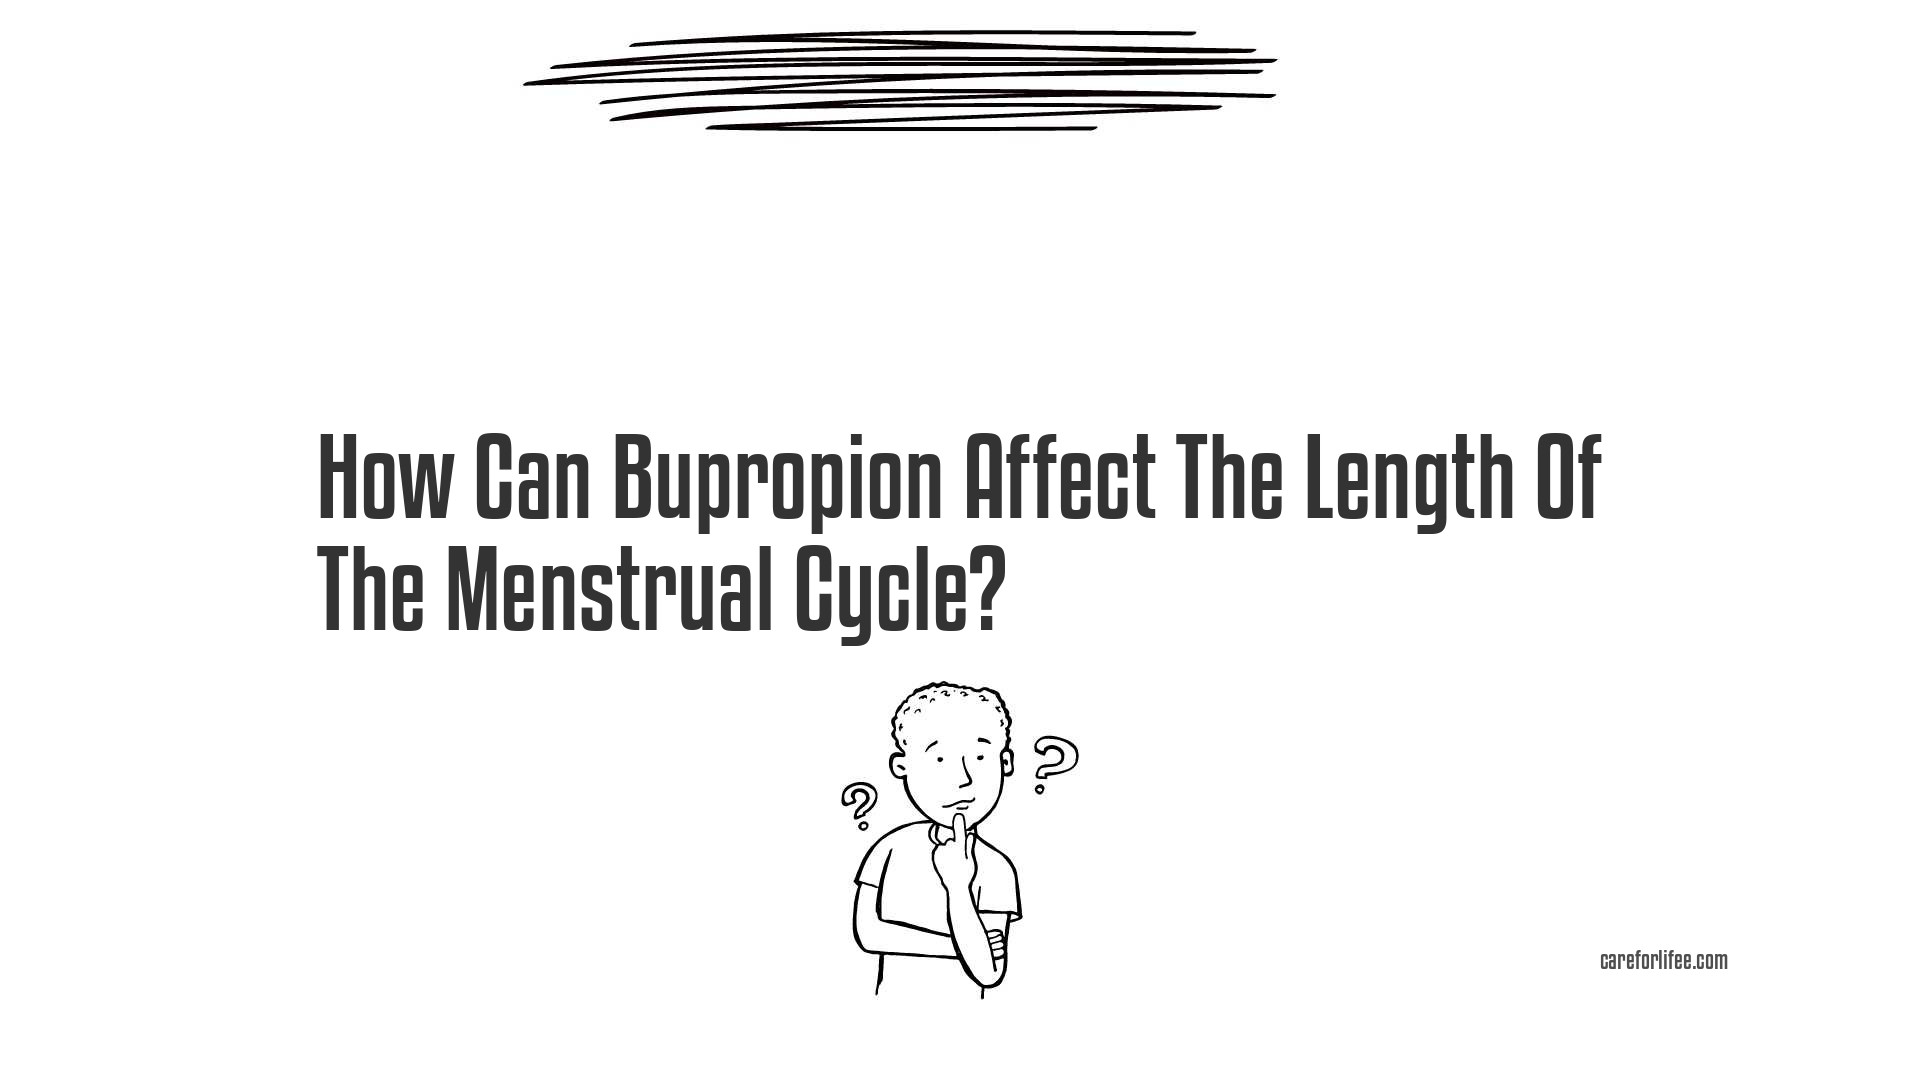 How Can Bupropion Affect The Length Of The Menstrual Cycle?